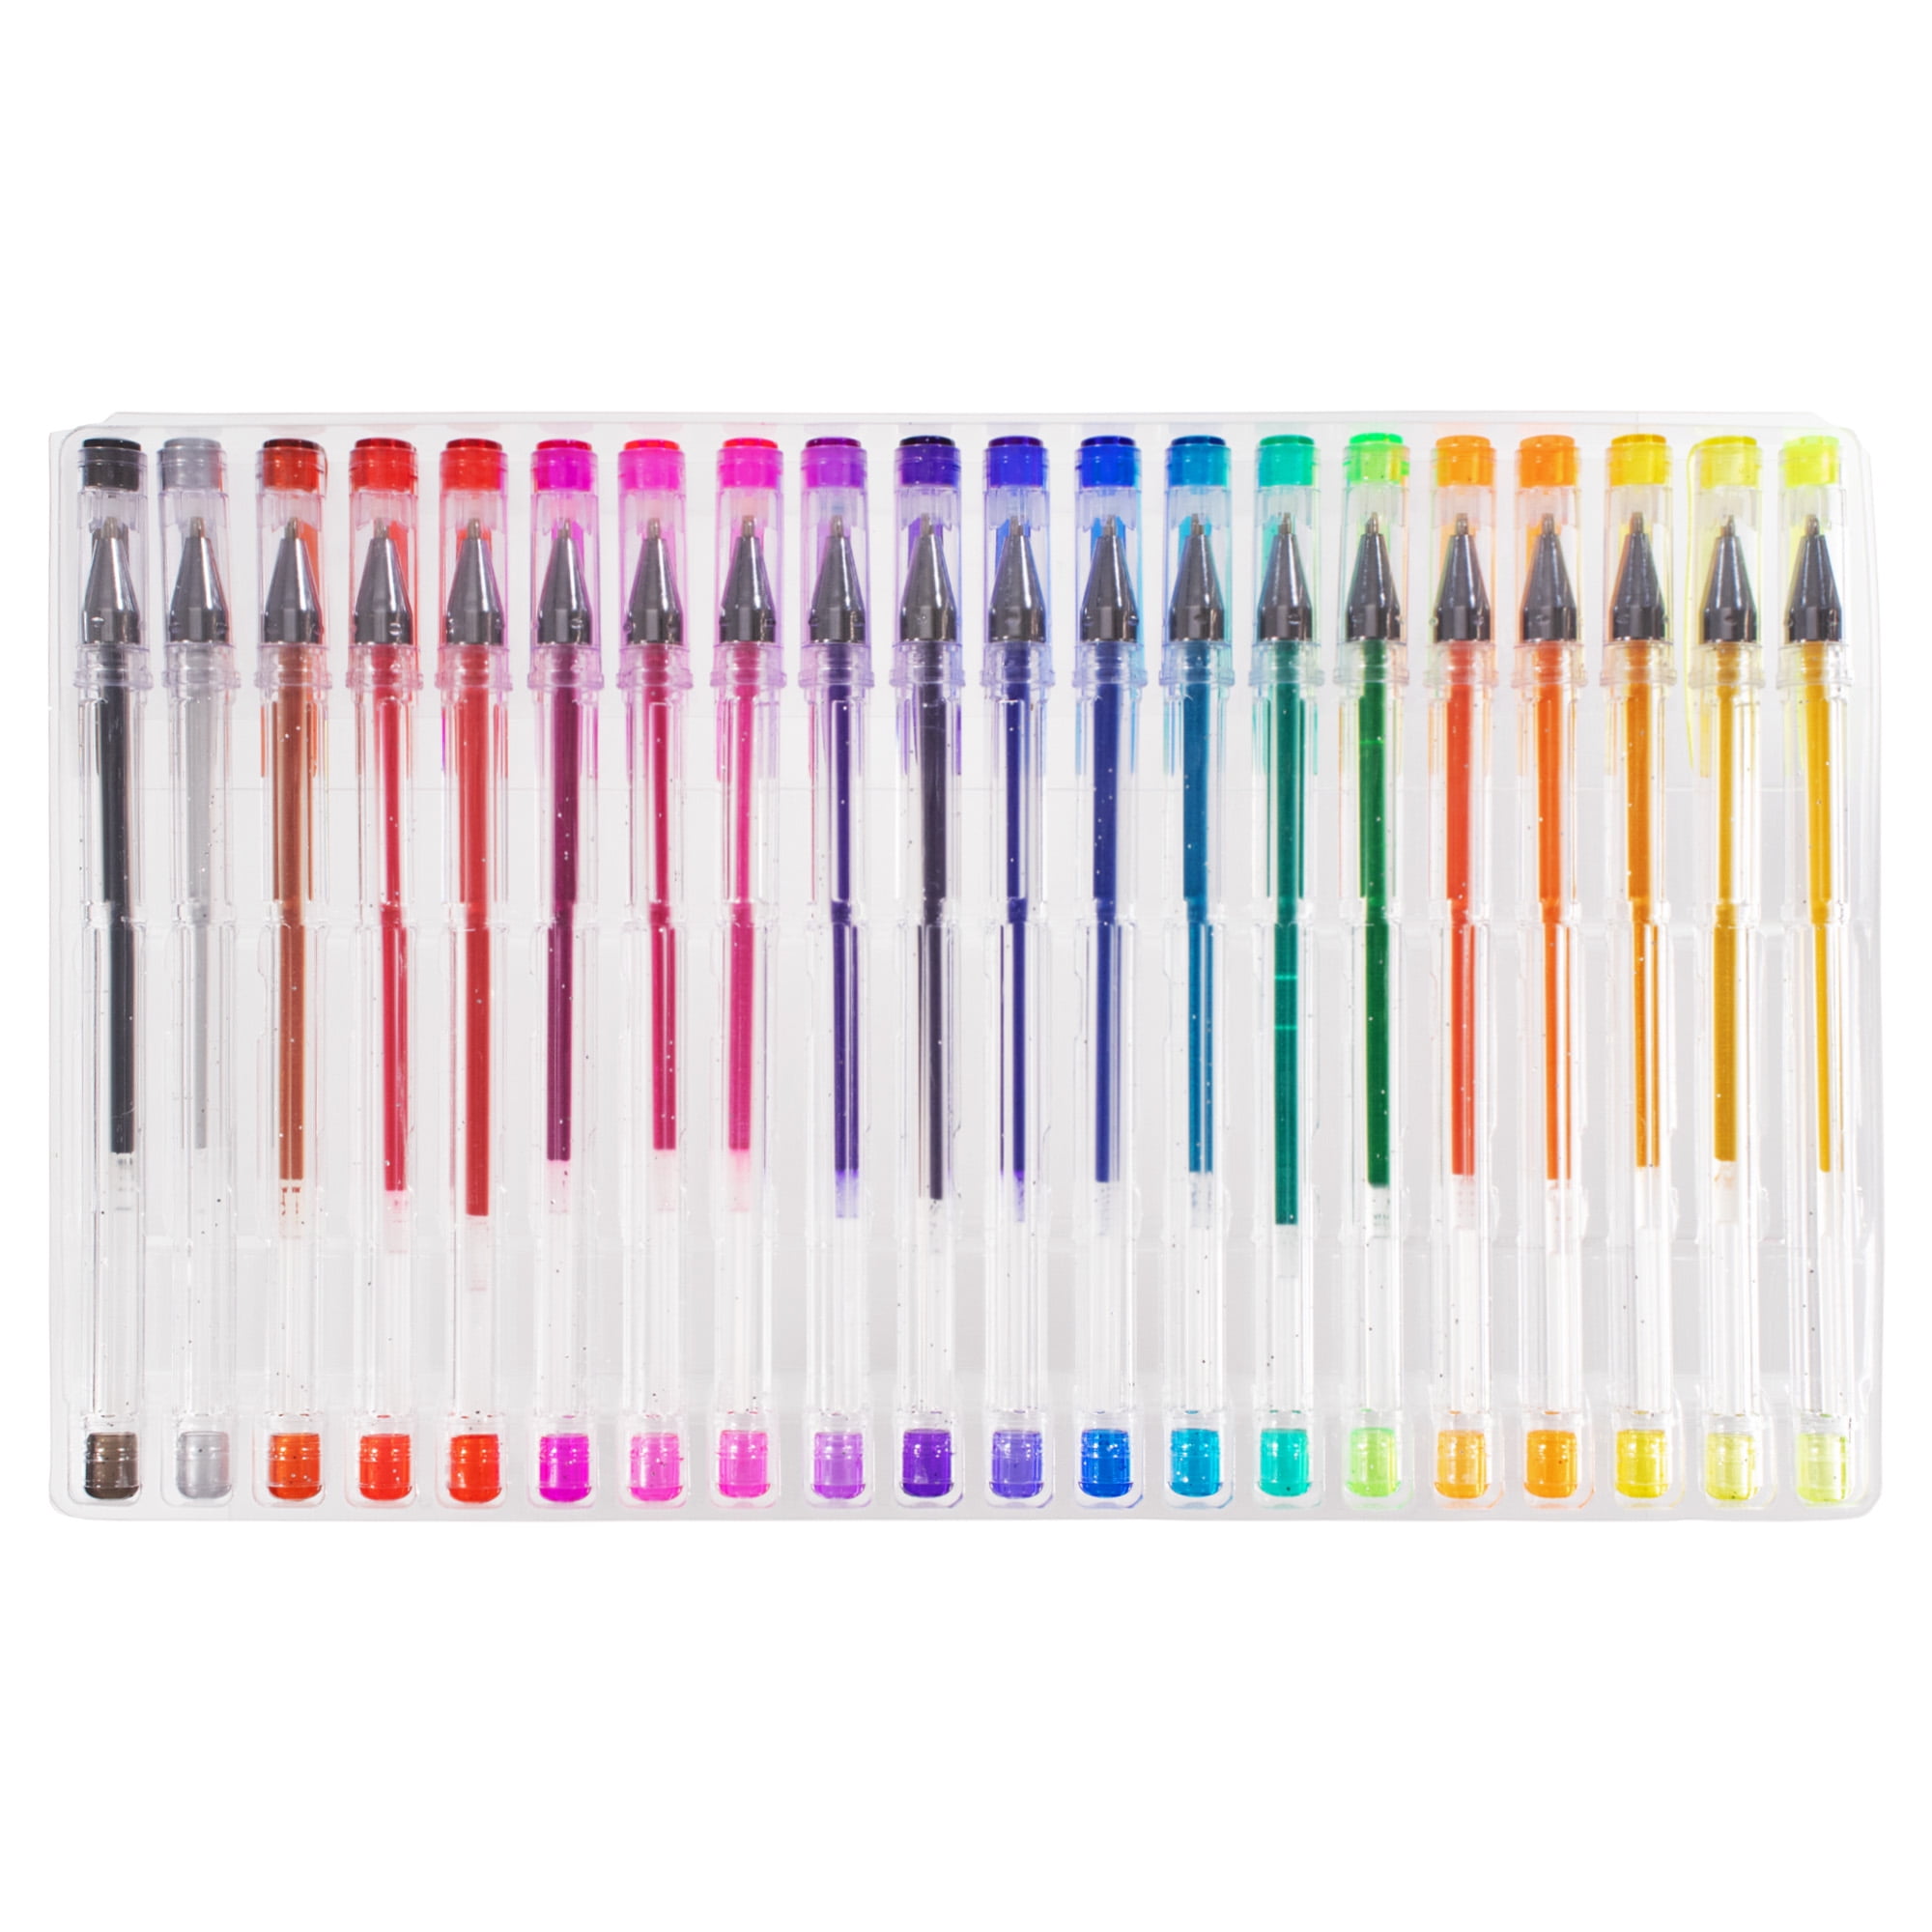 Craft County 100 Pack of Gel Pens - Neon, Glitter, Pastel